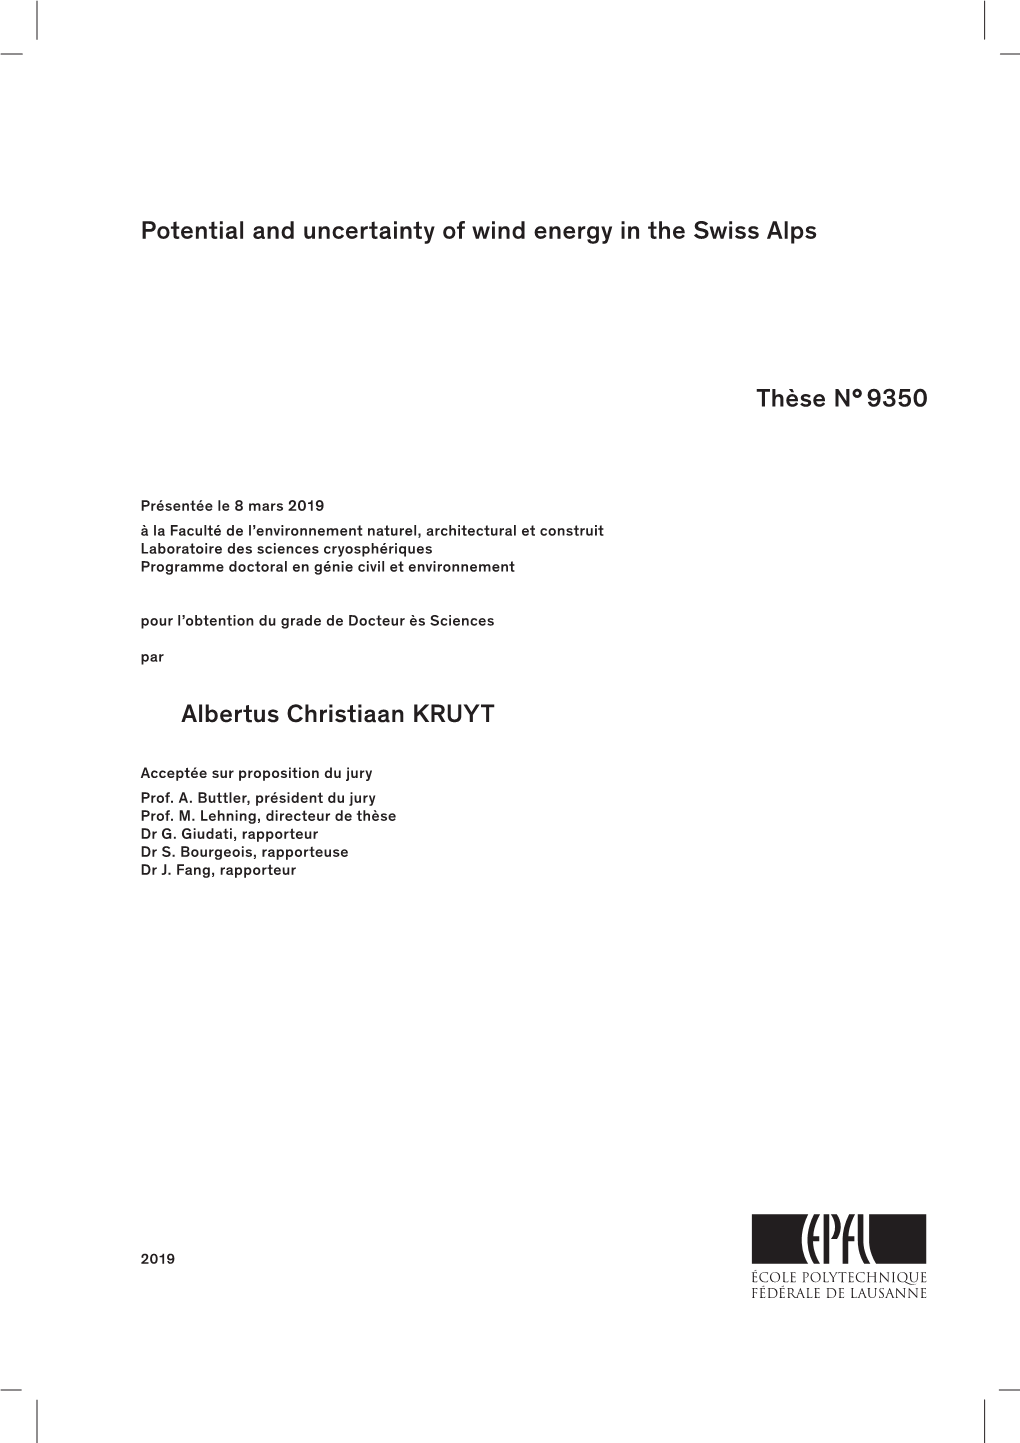 Potential and Uncertainty of Wind Energy in the Swiss Alps